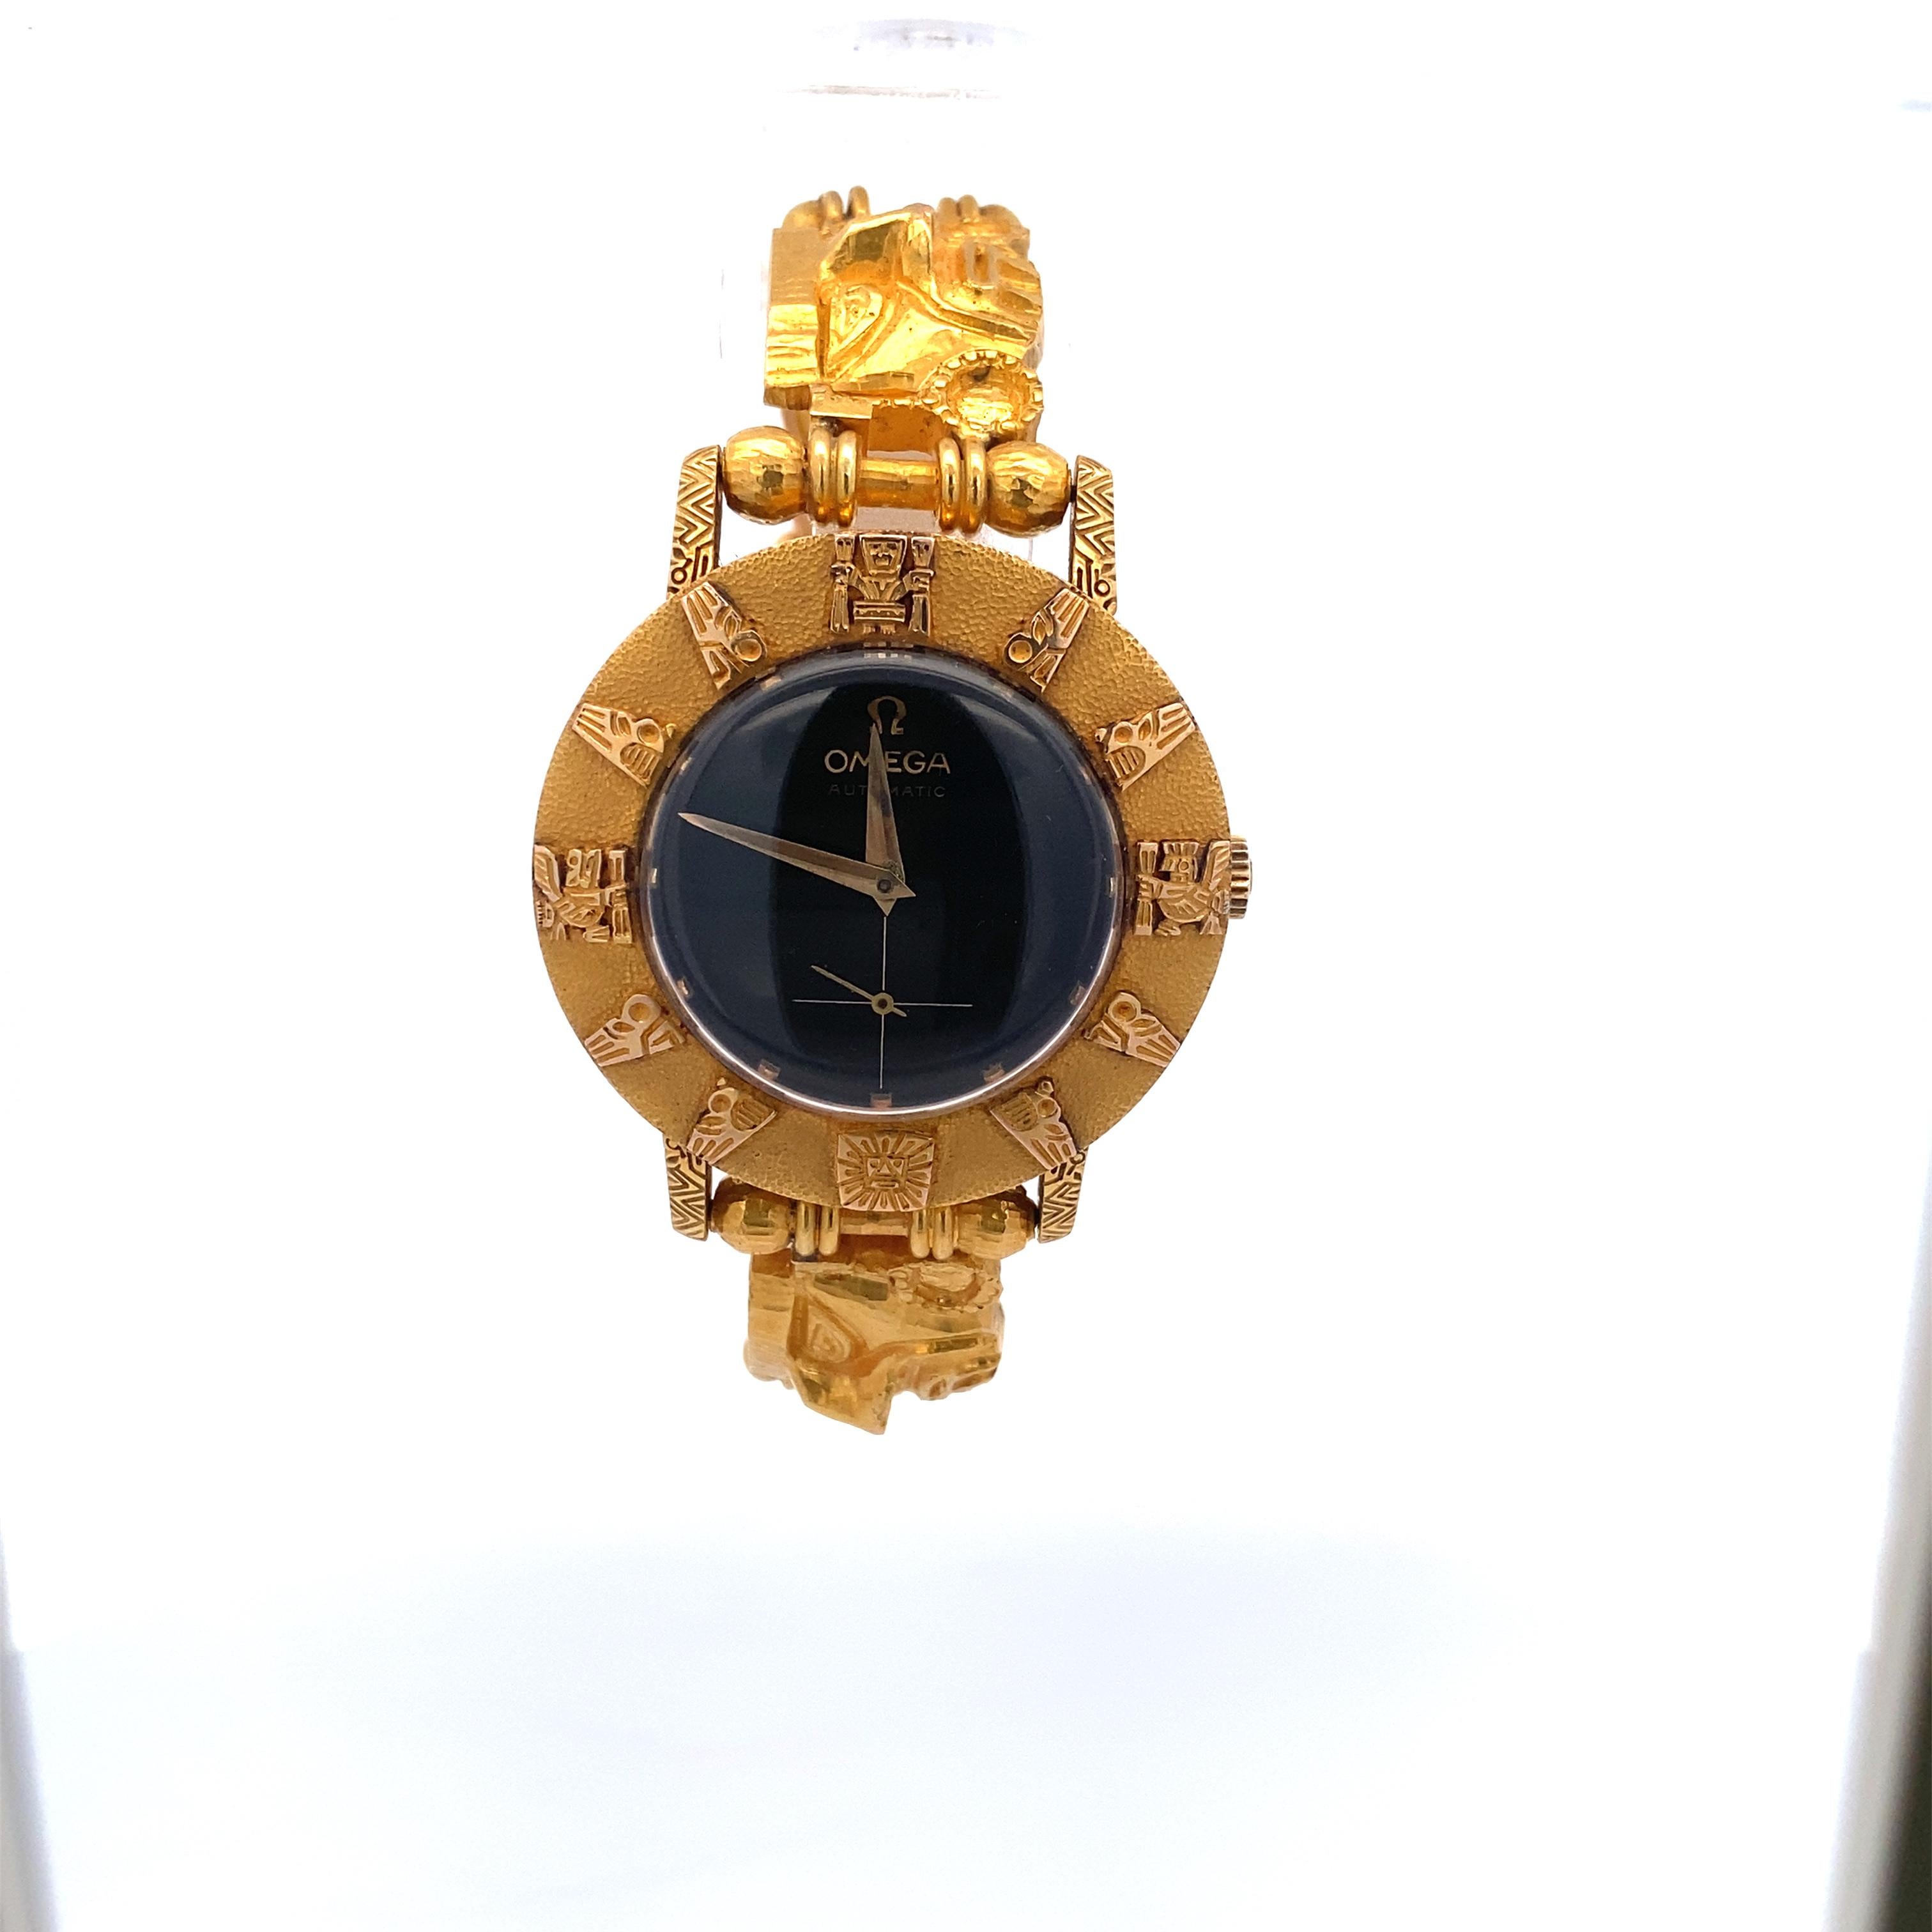 Women's or Men's Omega Mechanical Watch with Custom Made Solid Gold Peruvian Moche Case and Brace For Sale